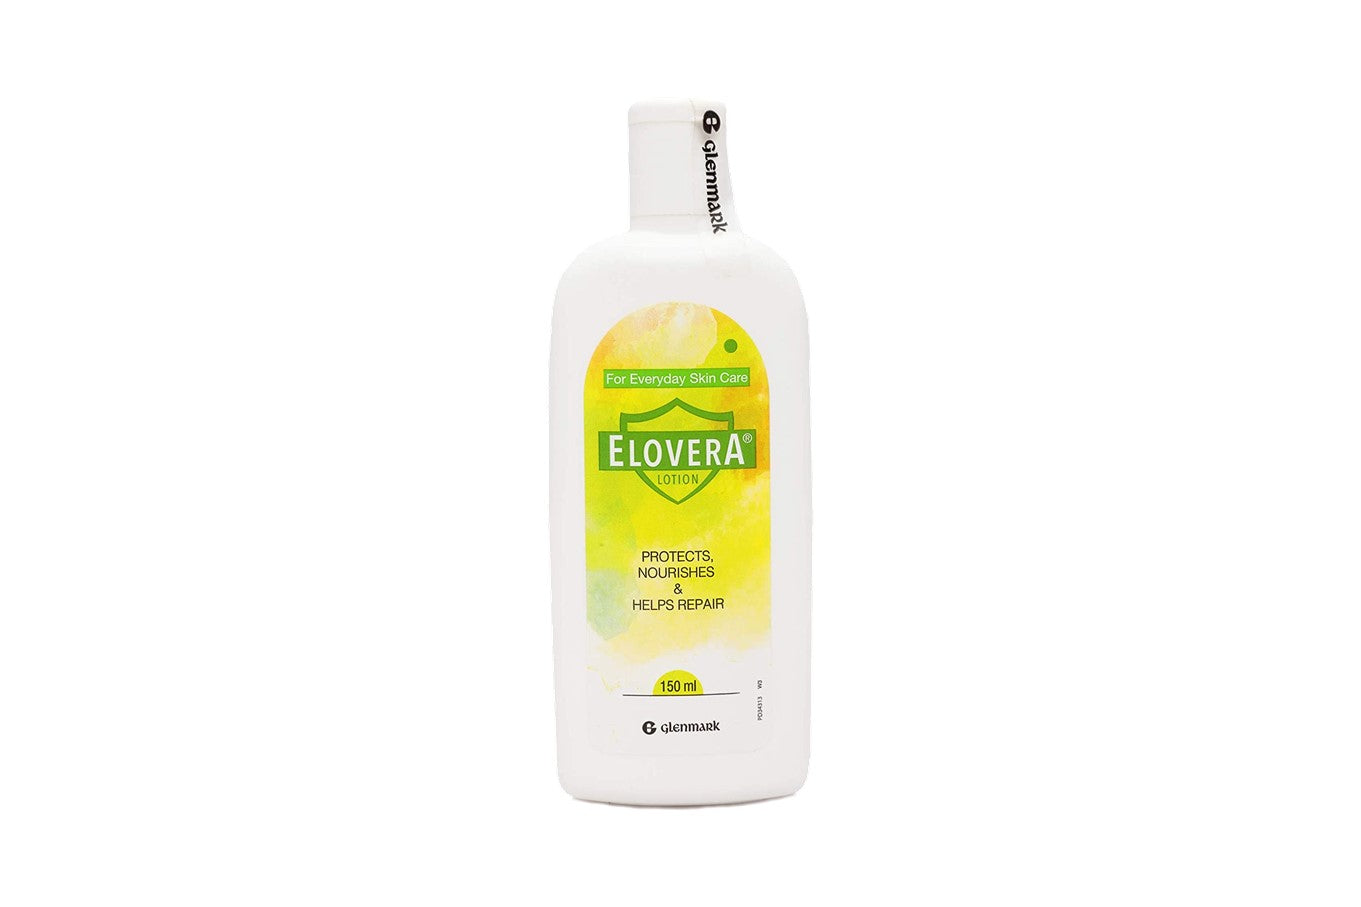 Elovera Lotion 75ml (Pack of 2)